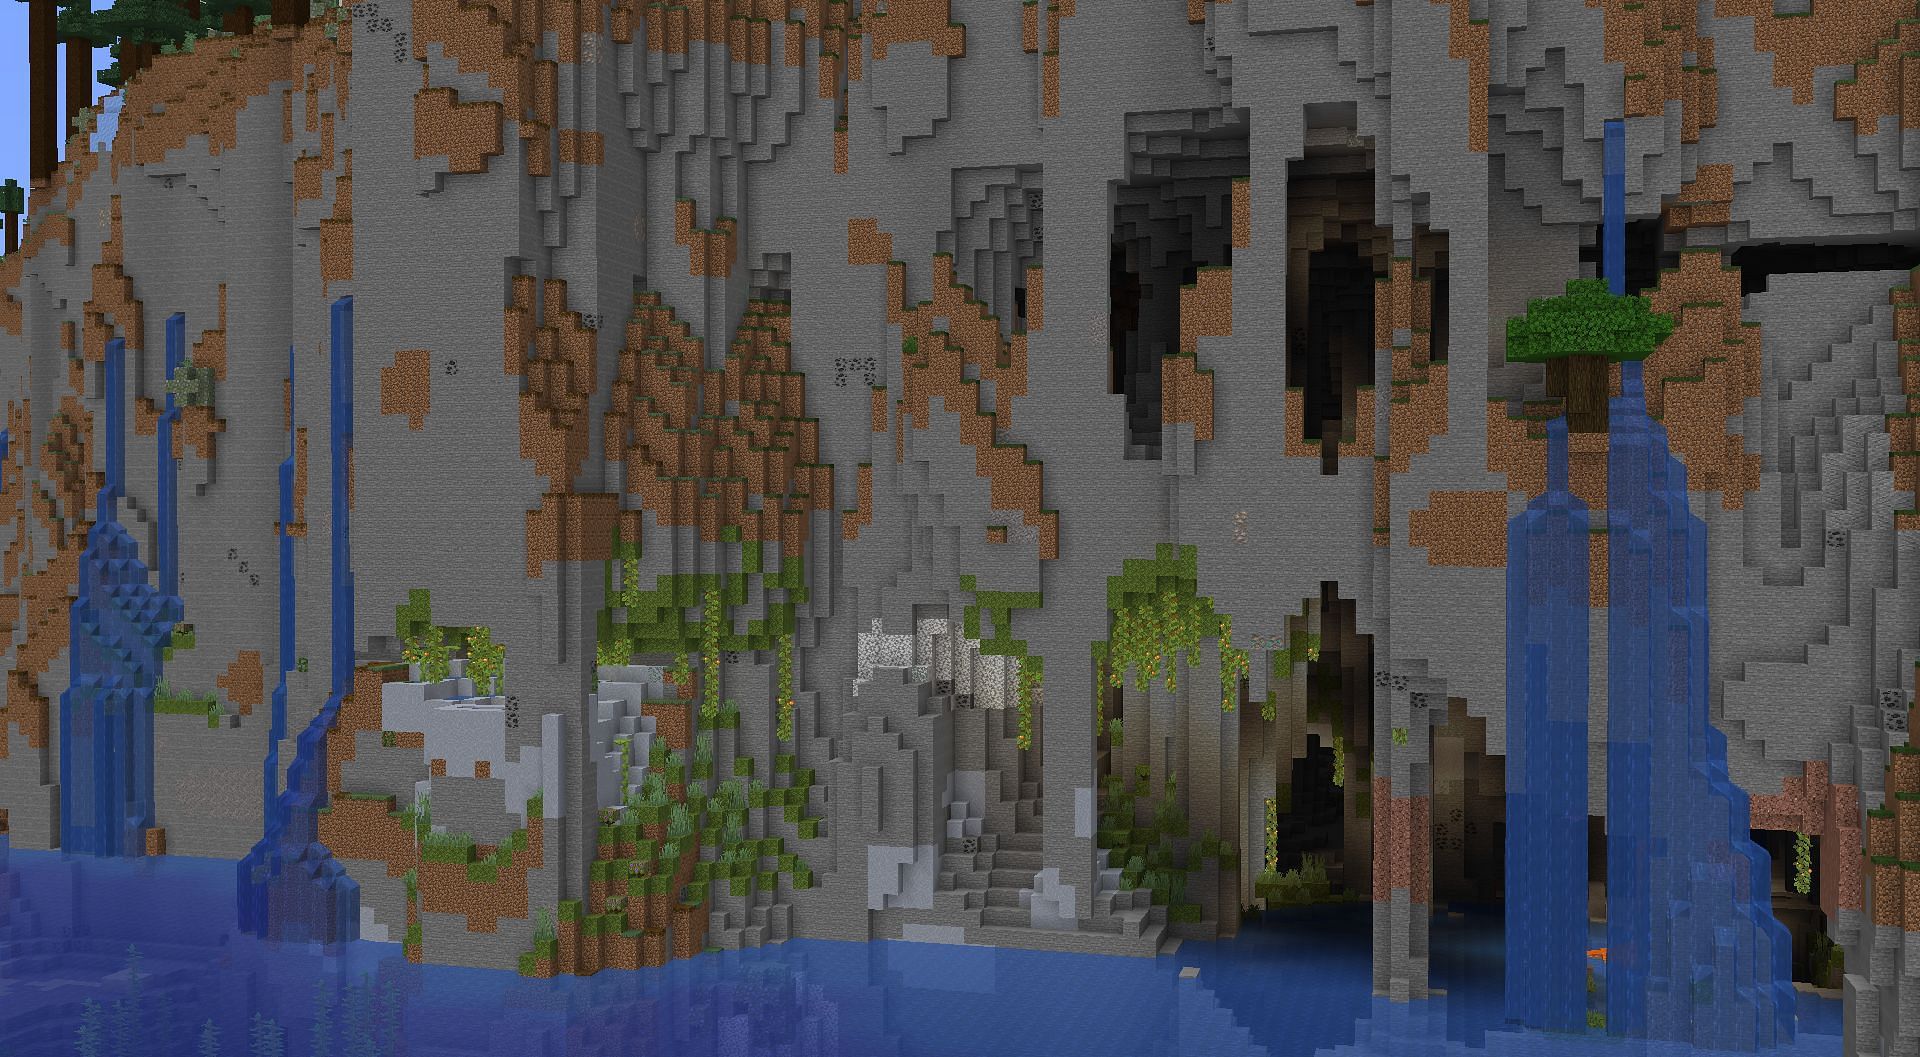 Exposed cave biome on the side of a huge cliff (Image via Mojang)